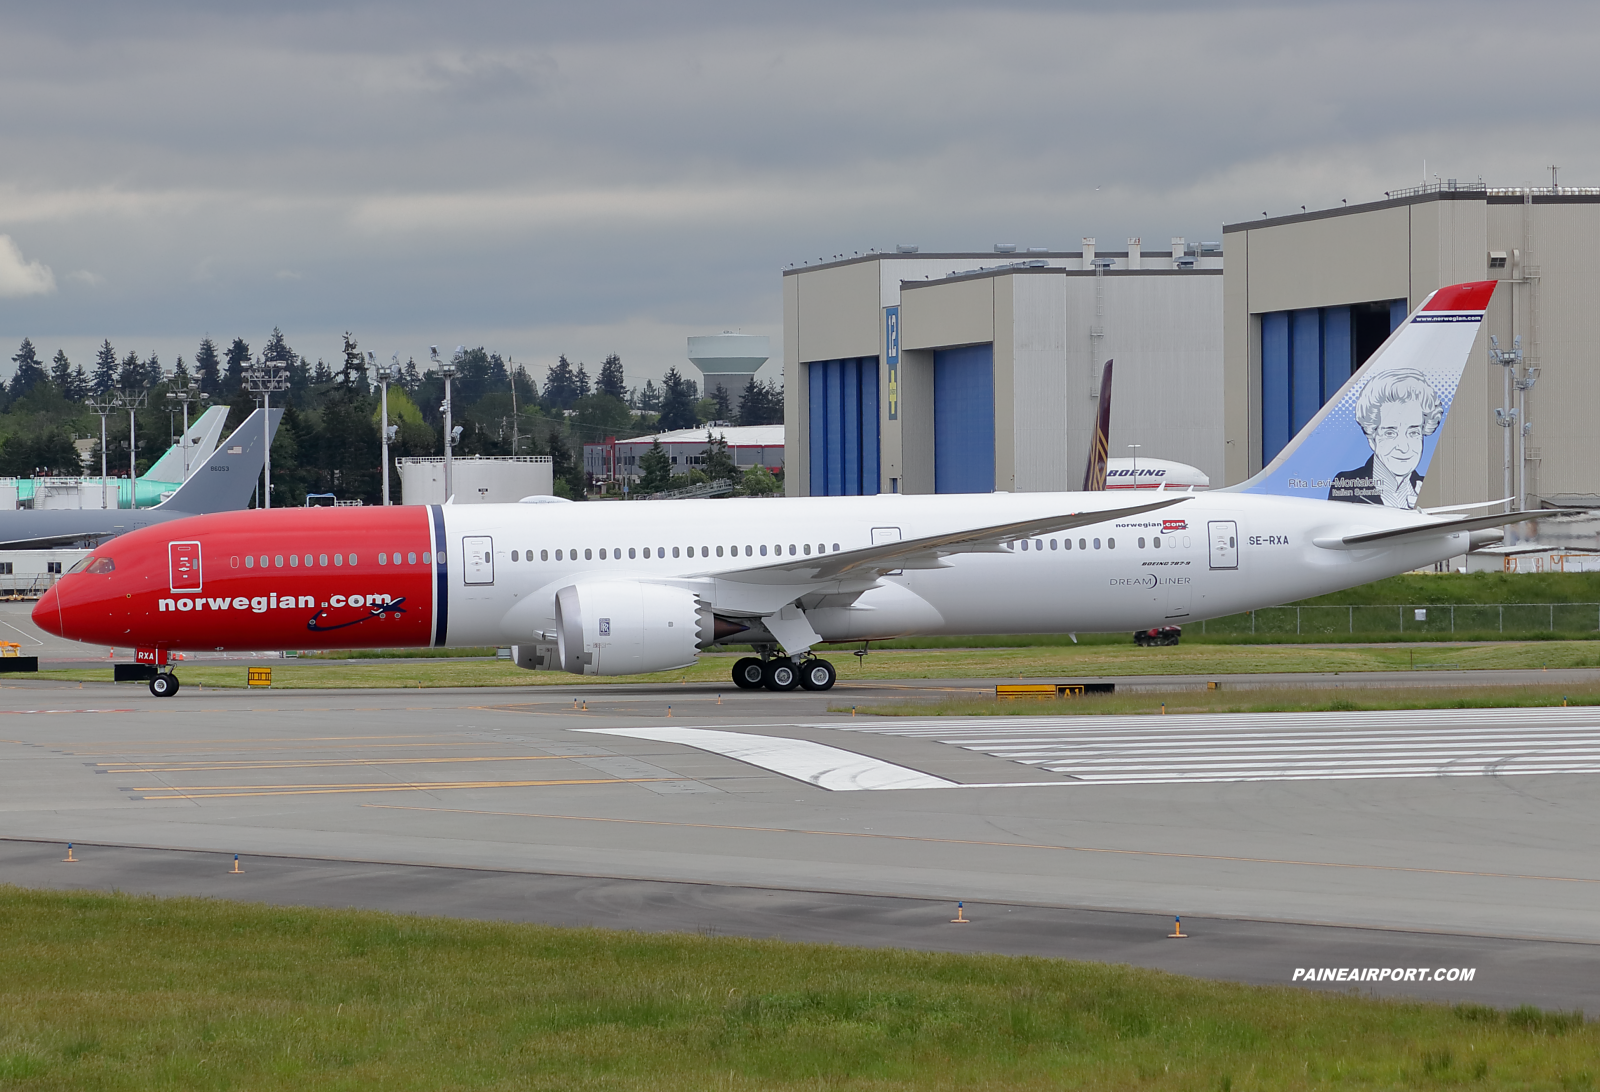 SE-RXA at Paine Field